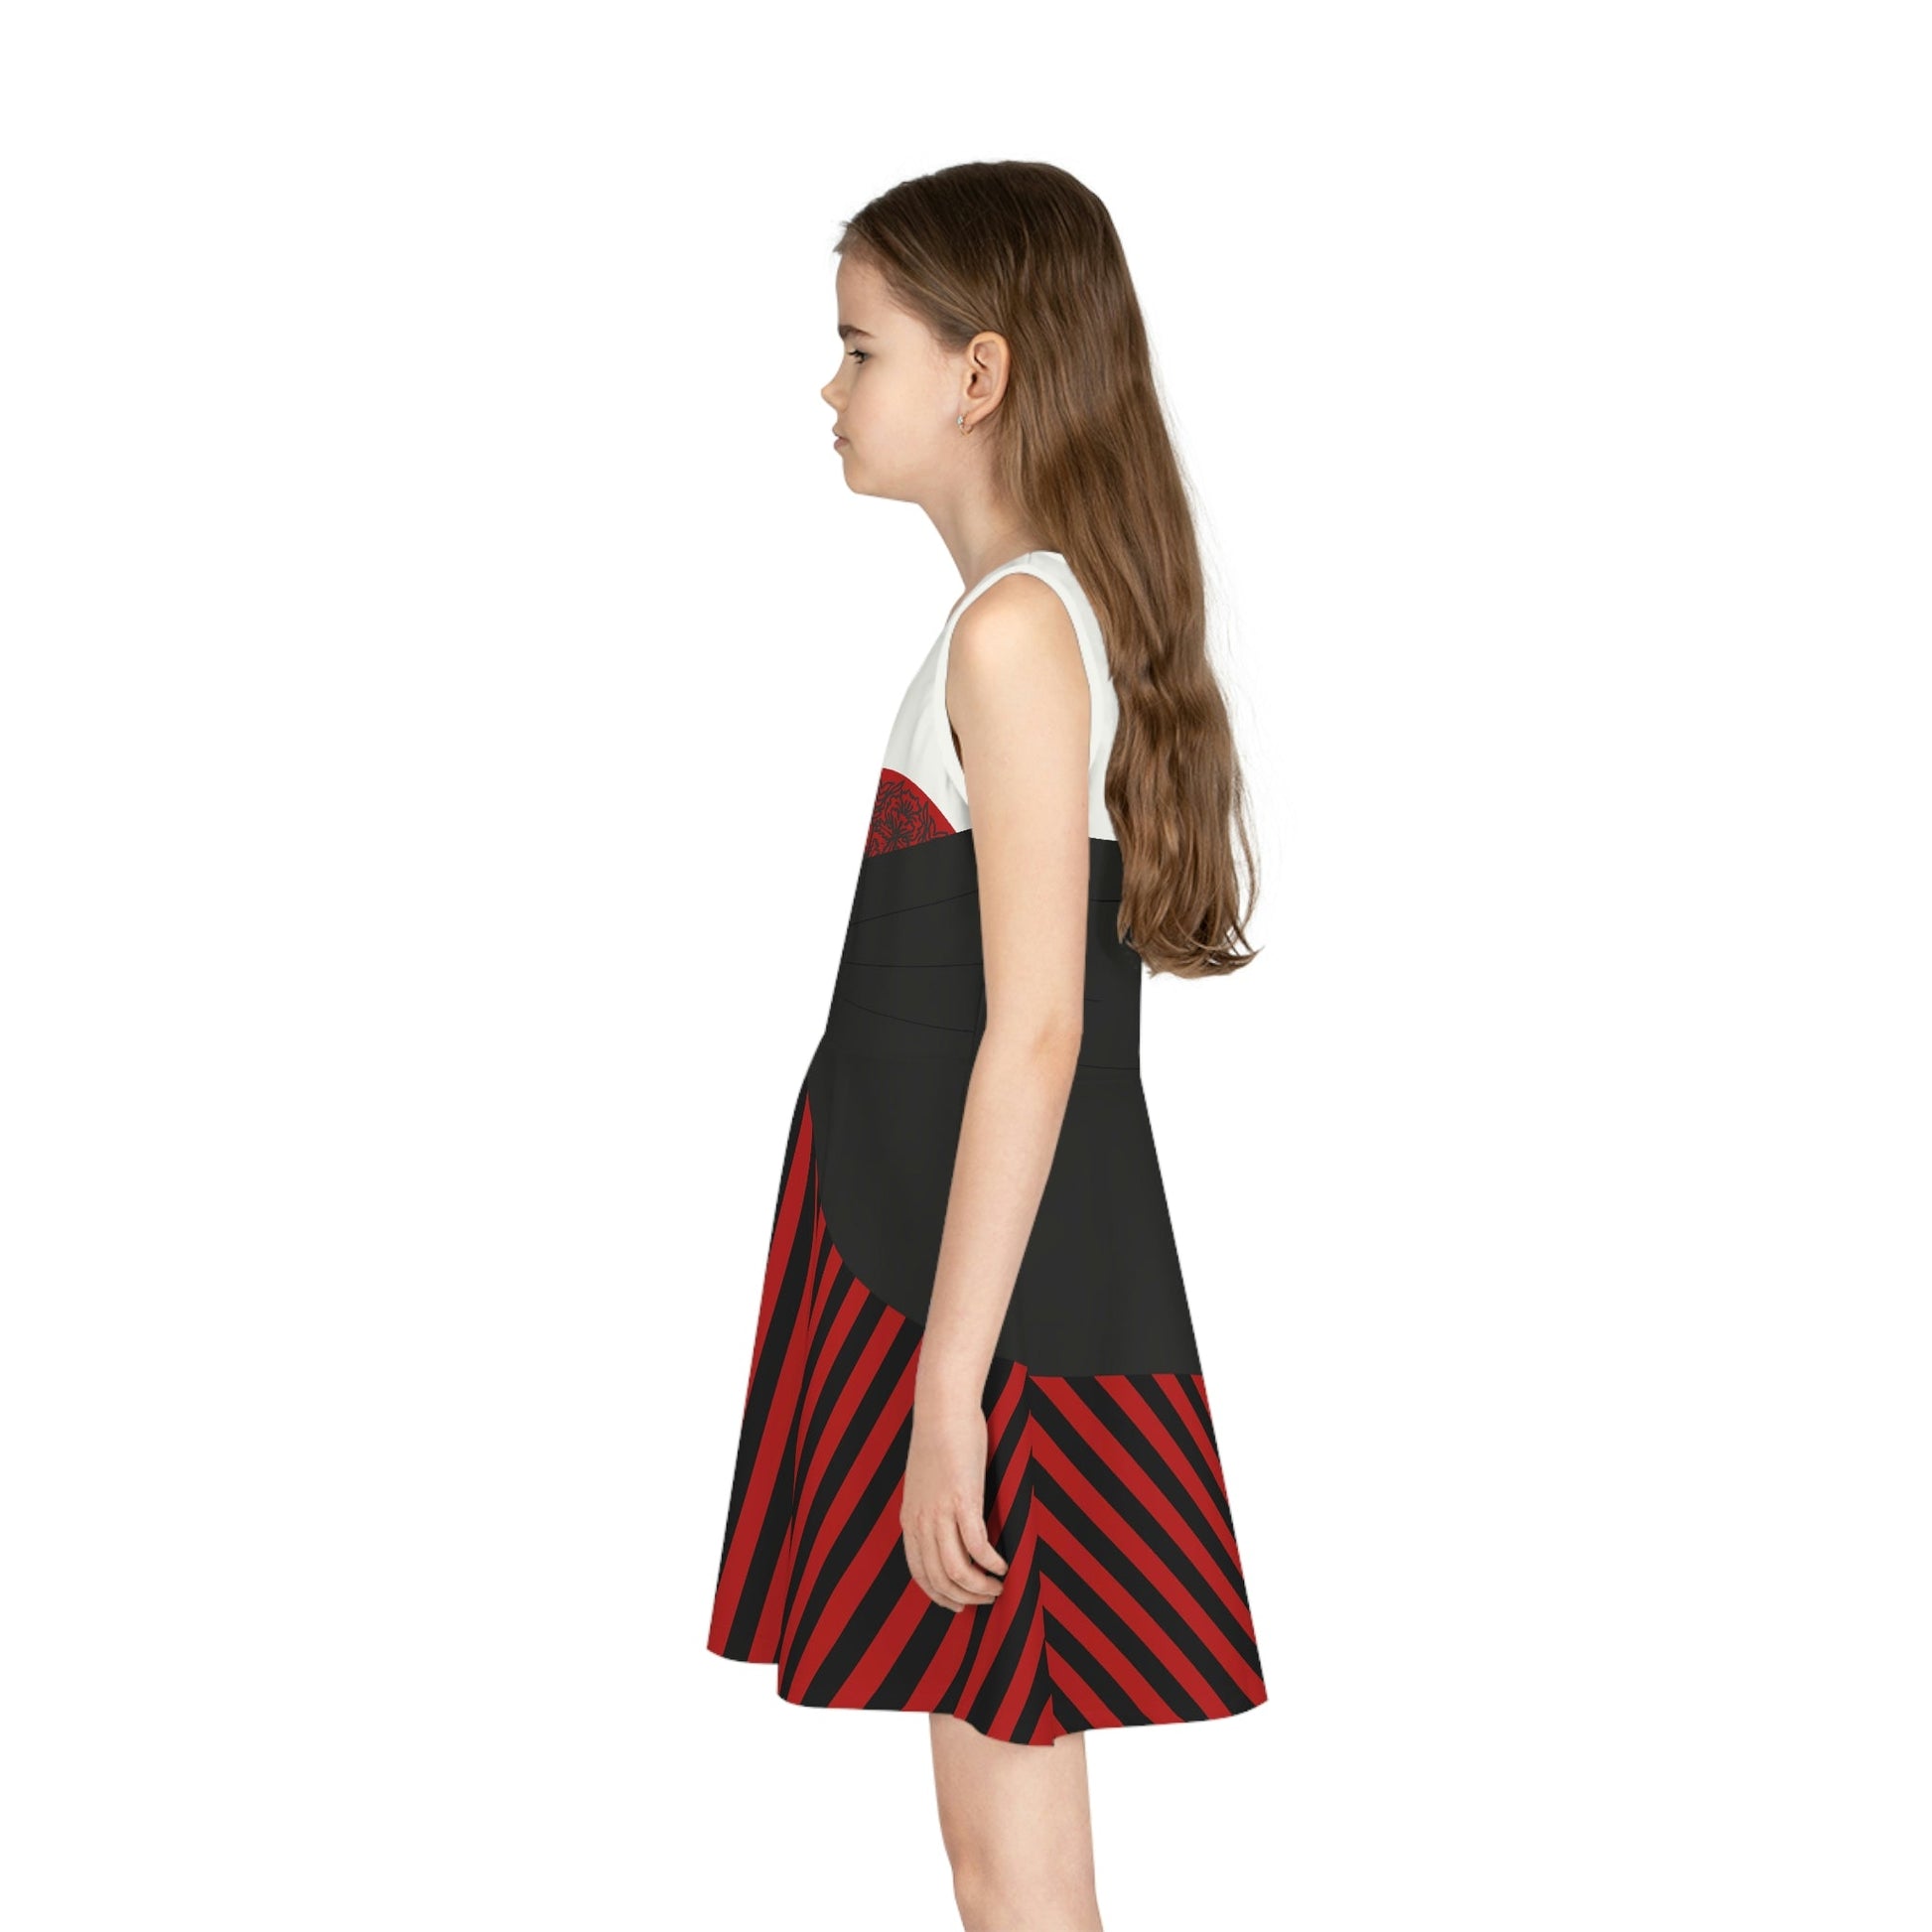 Pirate Life Girls' Sleeveless Sundress All Over PrintAOPAOP Clothing#tag4##tag5##tag6#